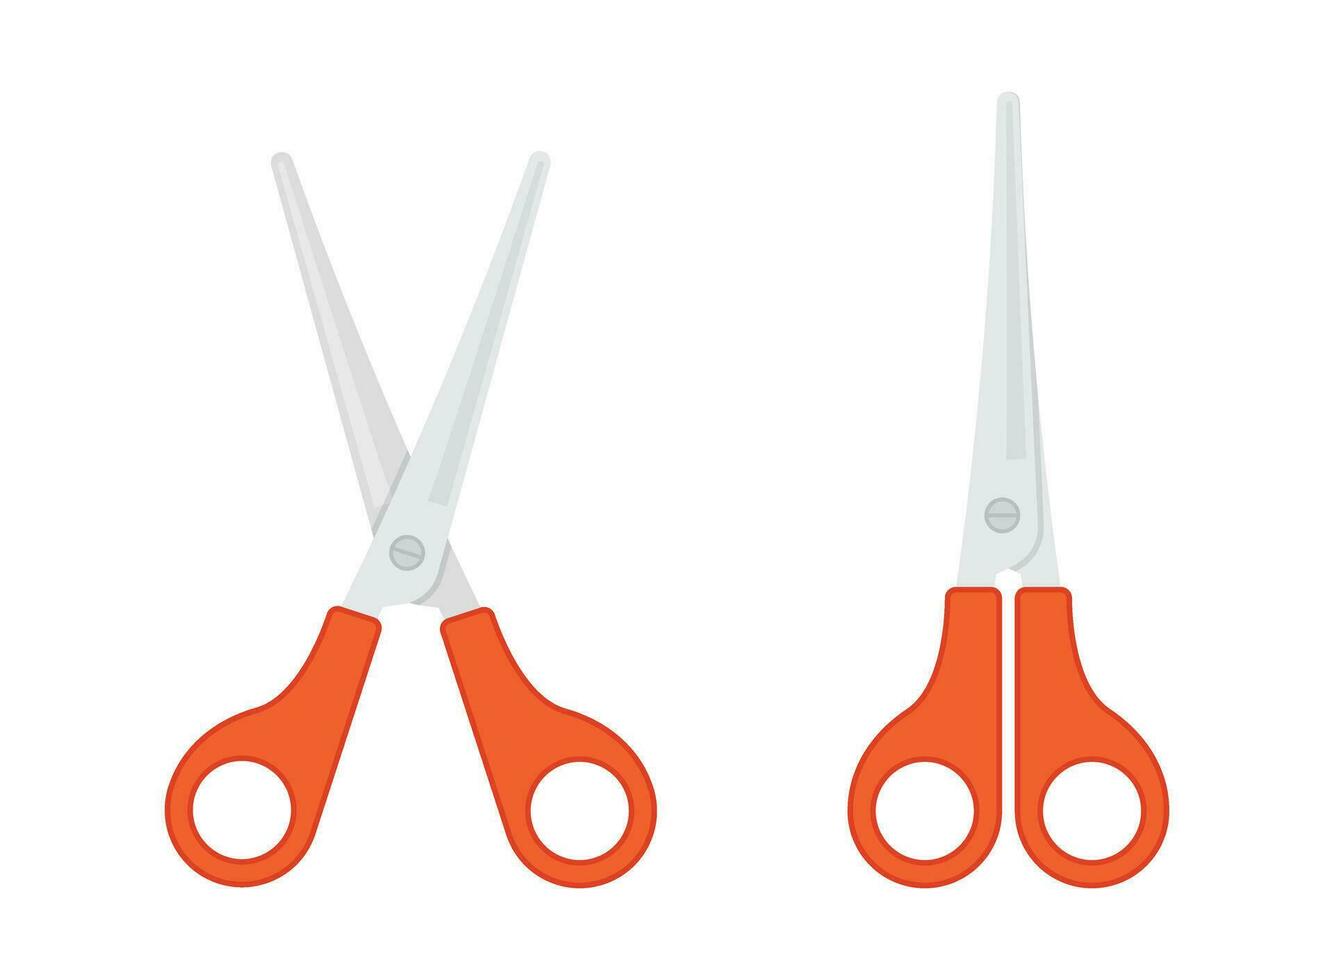 Scissor icon in flat style. Cutting hair equipment vector illustration on isolated background. Hairdressing sign business concept.